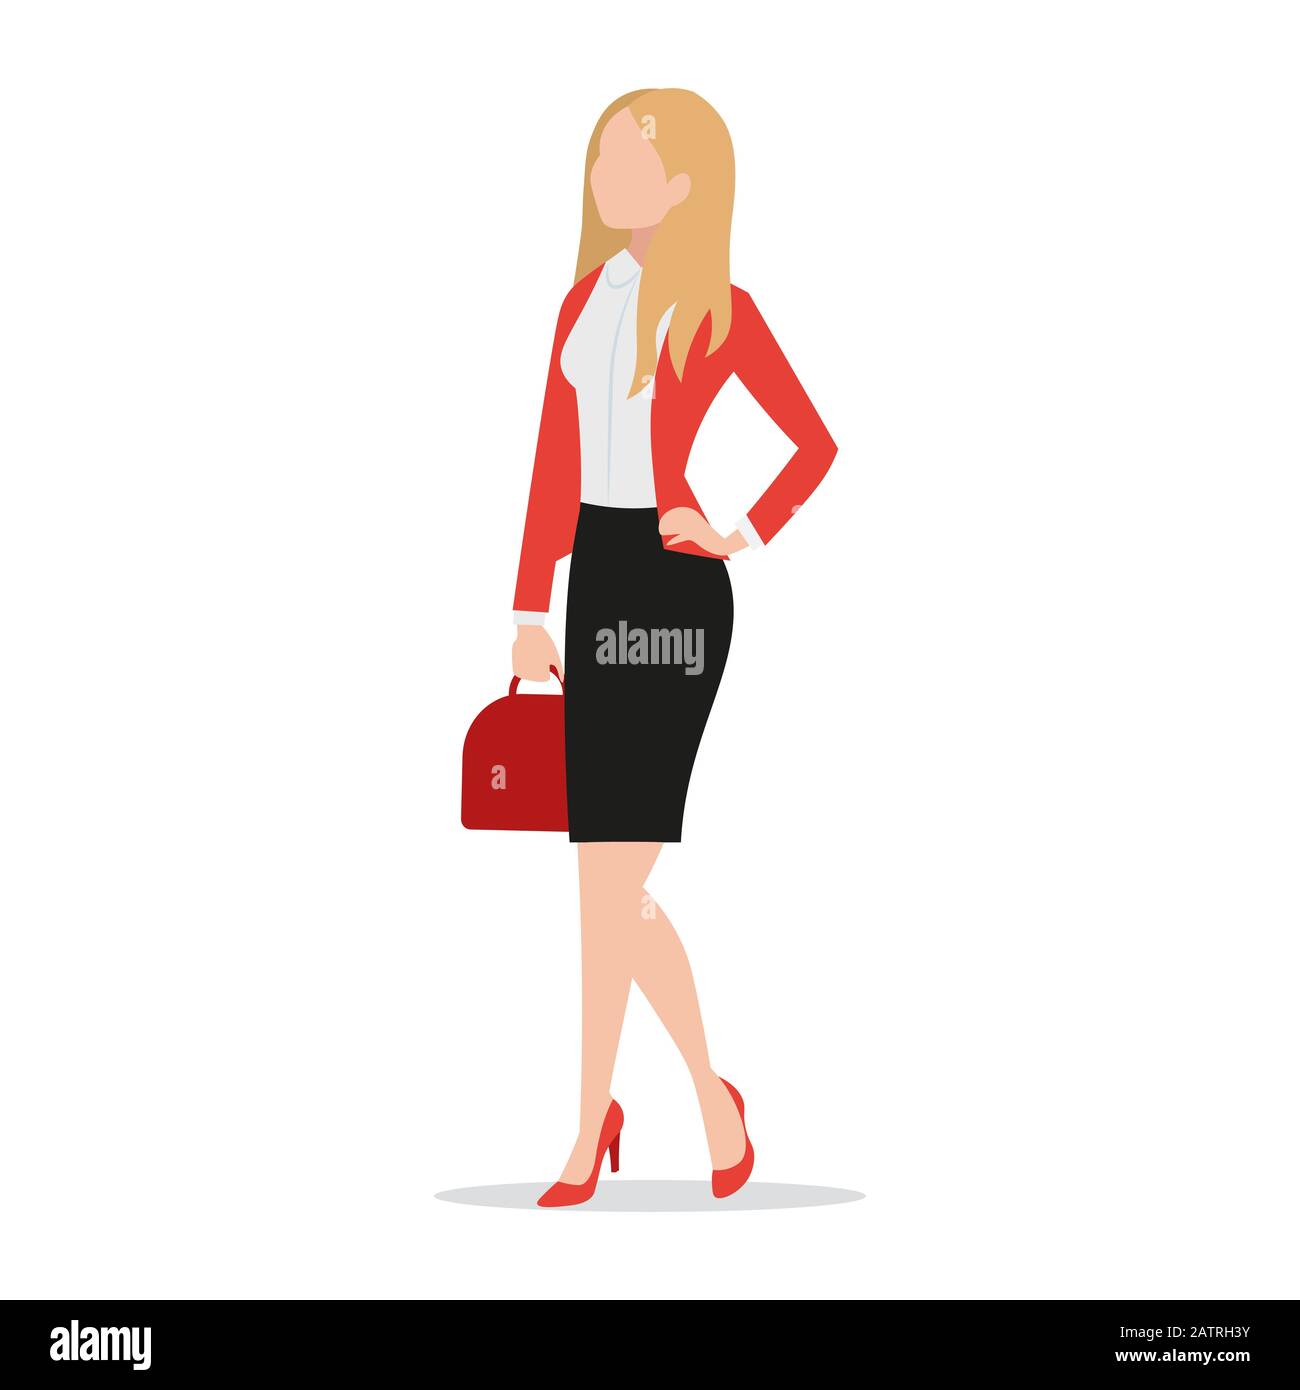 Successful businesswoman wearing black skirt and red blazer holding red handbag flat style icon isolated on white background, confident female Stock Vector